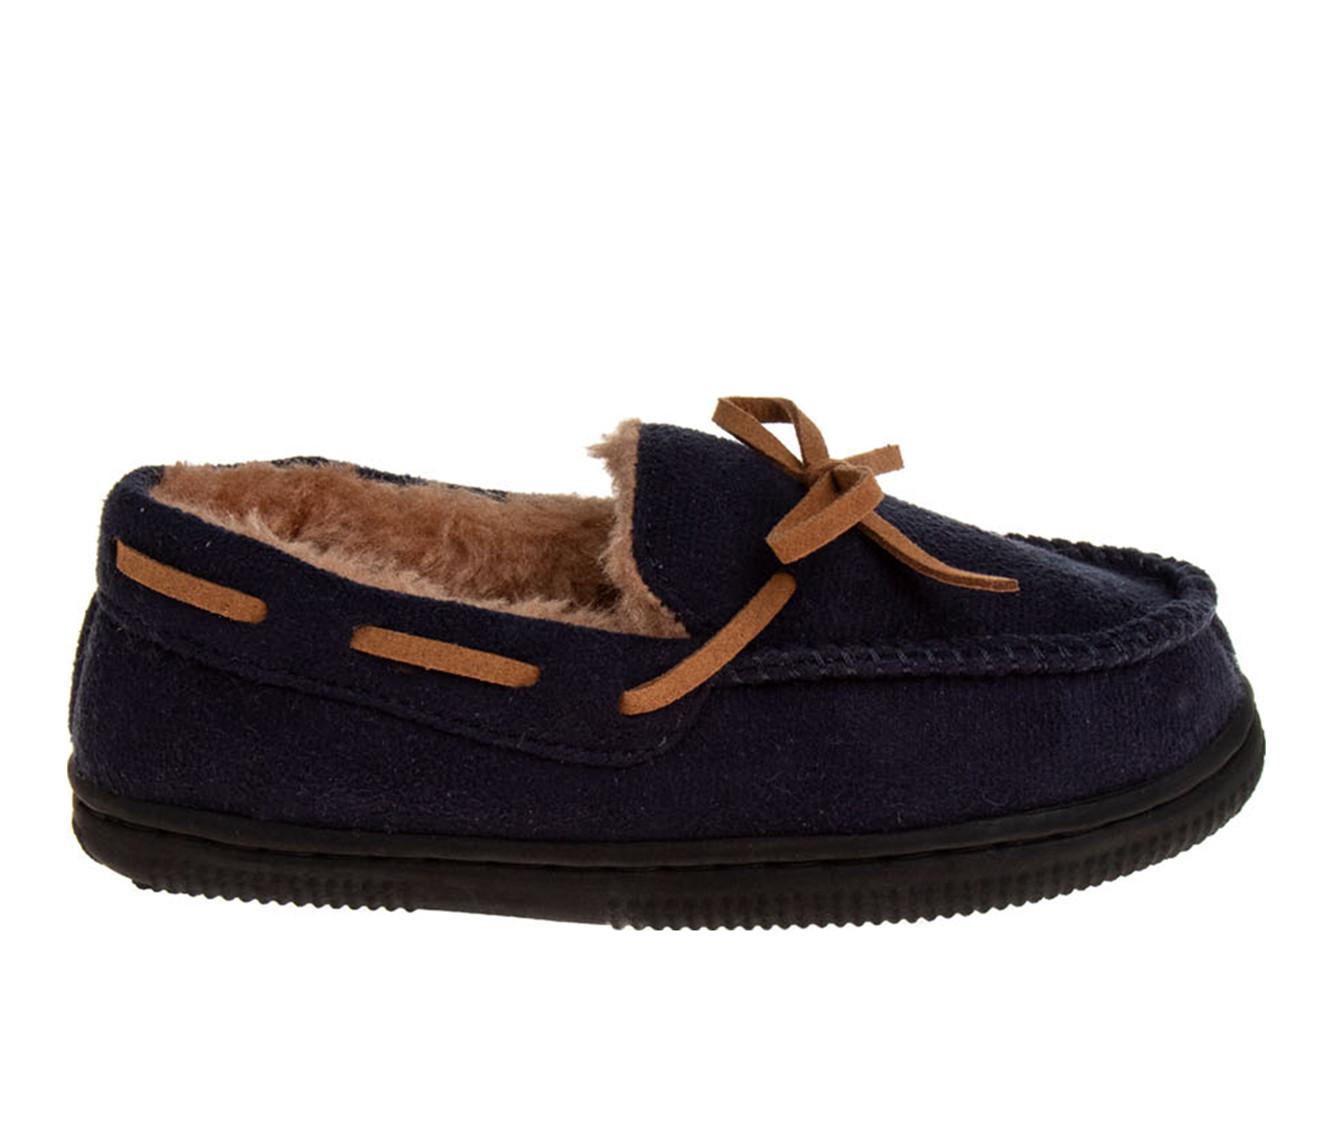 Boys' Beverly Hills Polo Club Tenacious Tyler 11-4 Boat Shoes